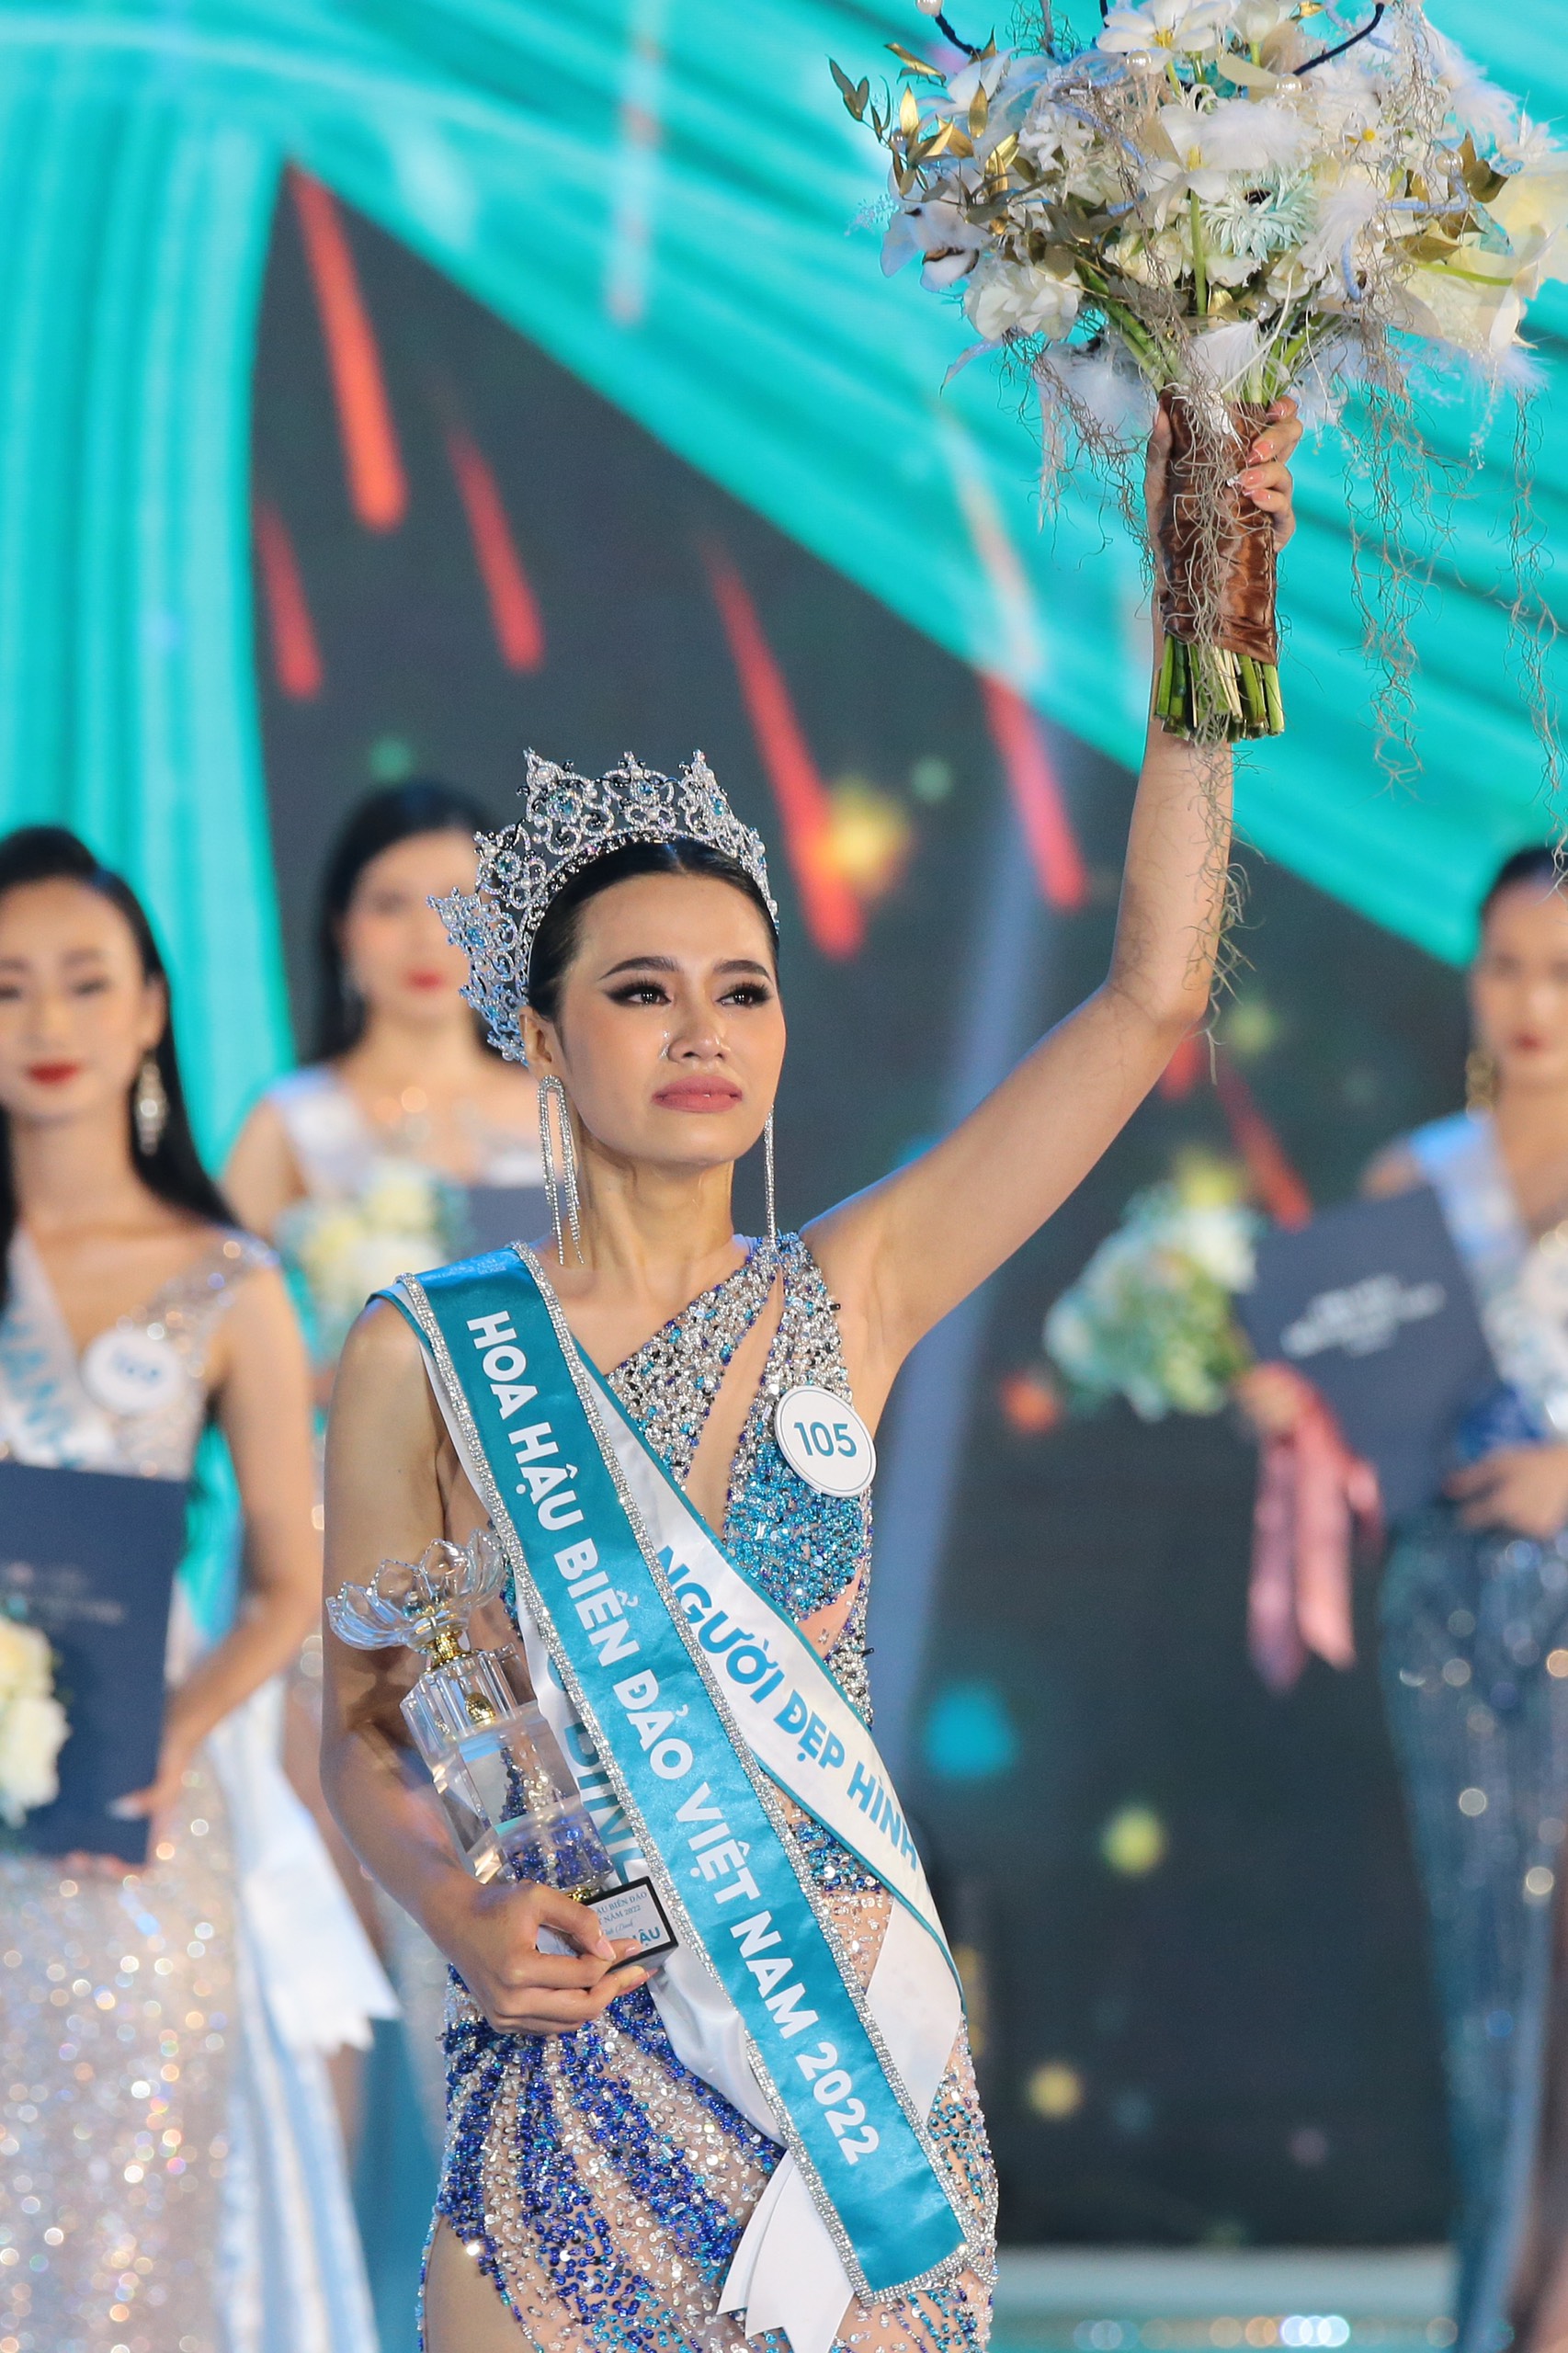 Dinh Nhu Phuong is crowned Miss Sea Island Vietnam 2022 in Quang Ninh Province, Vietnam, October 22, 2022 in this photo supplied by the organizing board.